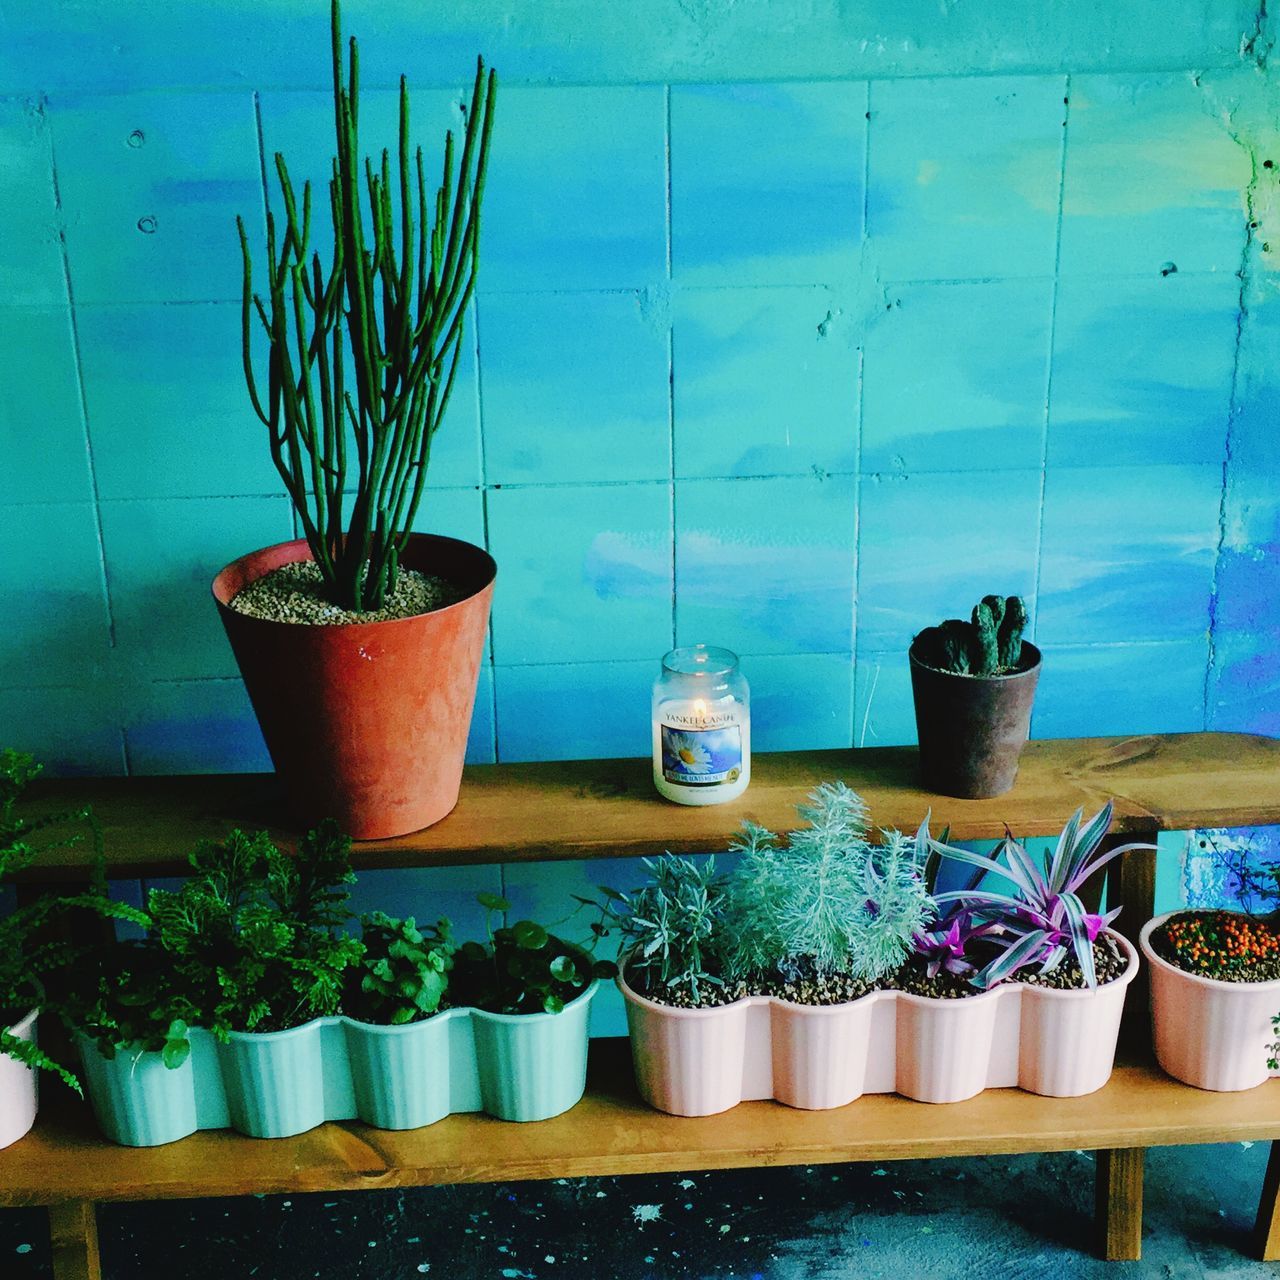 potted plant, blue, plant, wall - building feature, container, growth, metal, no people, day, close-up, still life, wall, flower pot, table, side by side, outdoors, wood - material, arrangement, sunlight, hanging